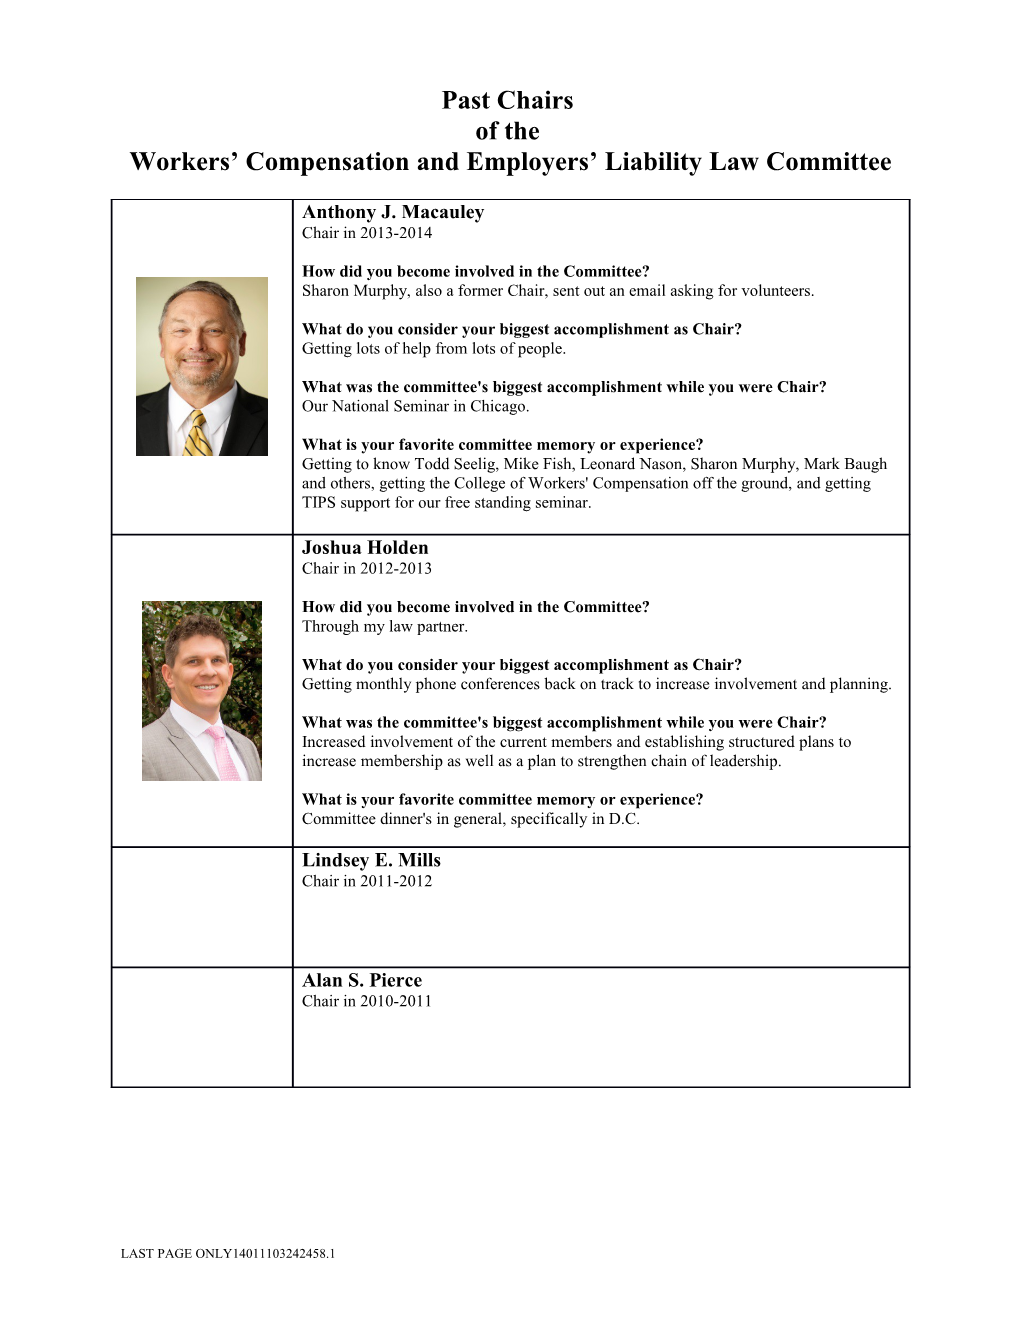 Workers Compensation and Employers Liability Law Committee